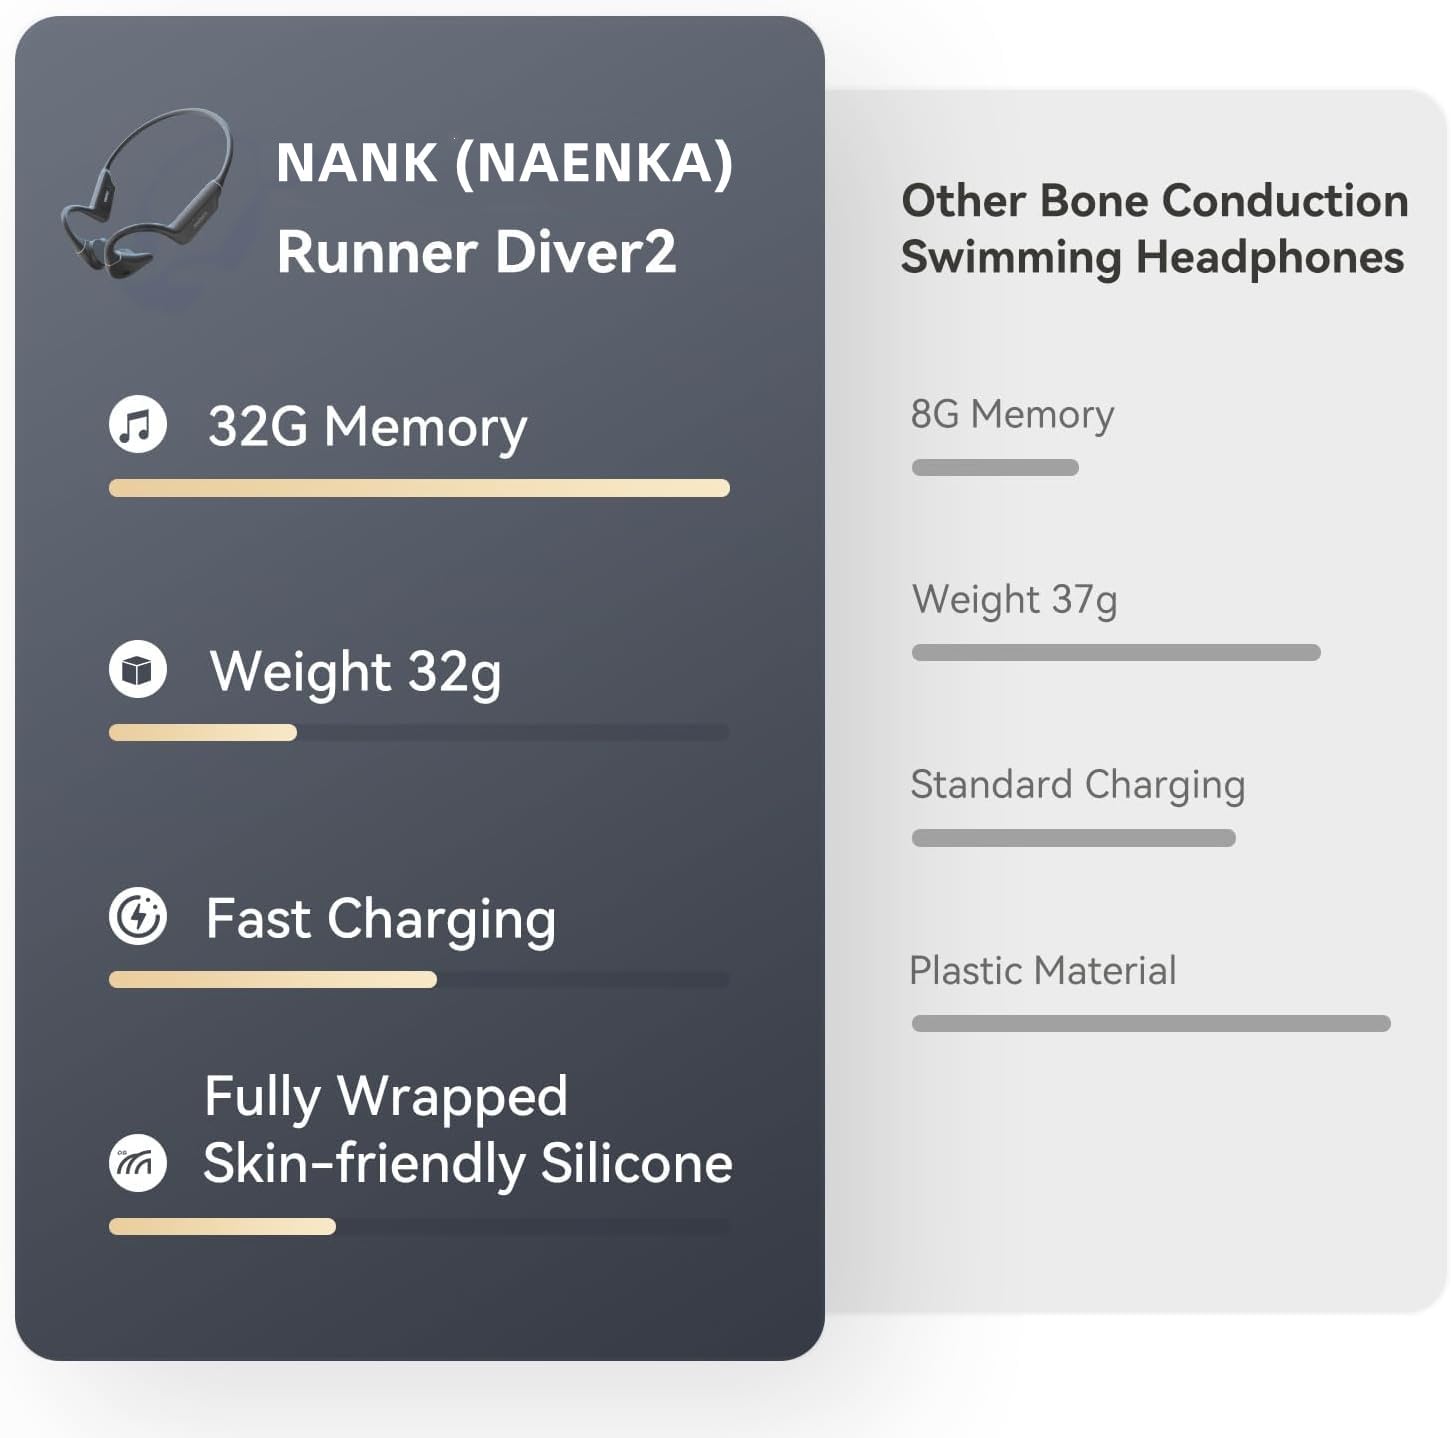 NANK Runner Diver2 Bone Conduction Headphones, IP68 Swimming Headphones with MP3 Player Built-in 32G Memory, Bluetooth 5.3 Open Ear Headphones with CVC6.0 Mic for Swimming Running Cycling Gym